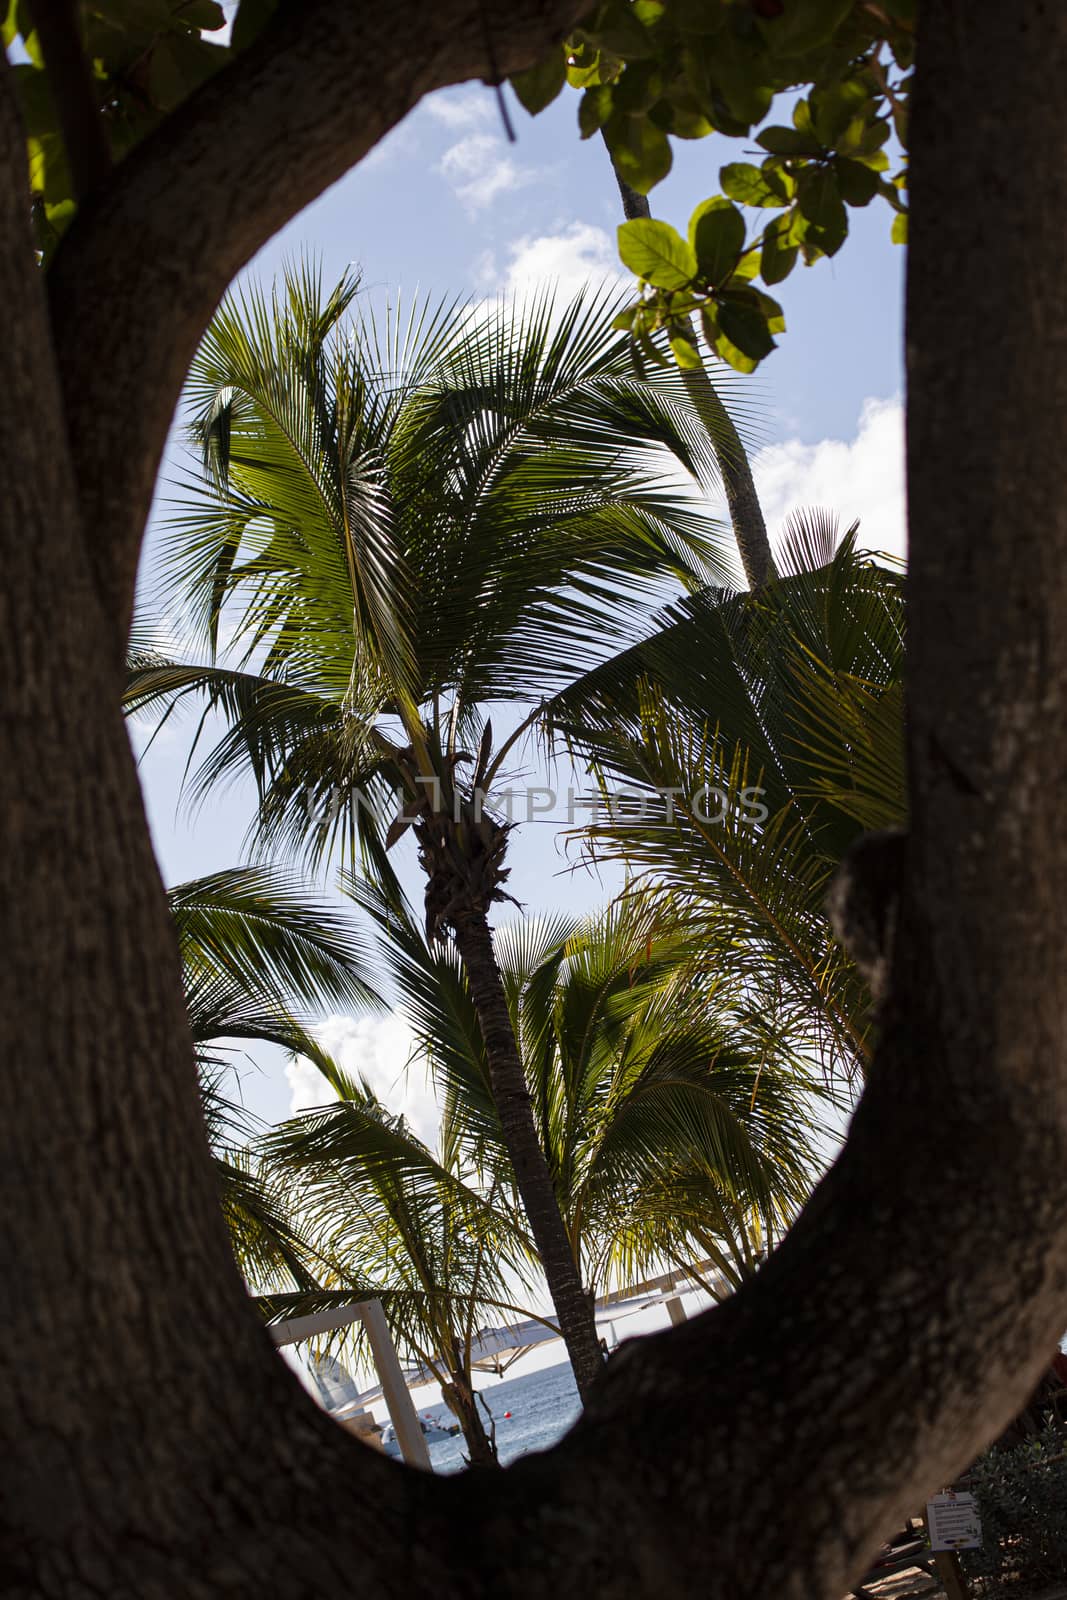 Dominican Palm tree 8 by pippocarlot